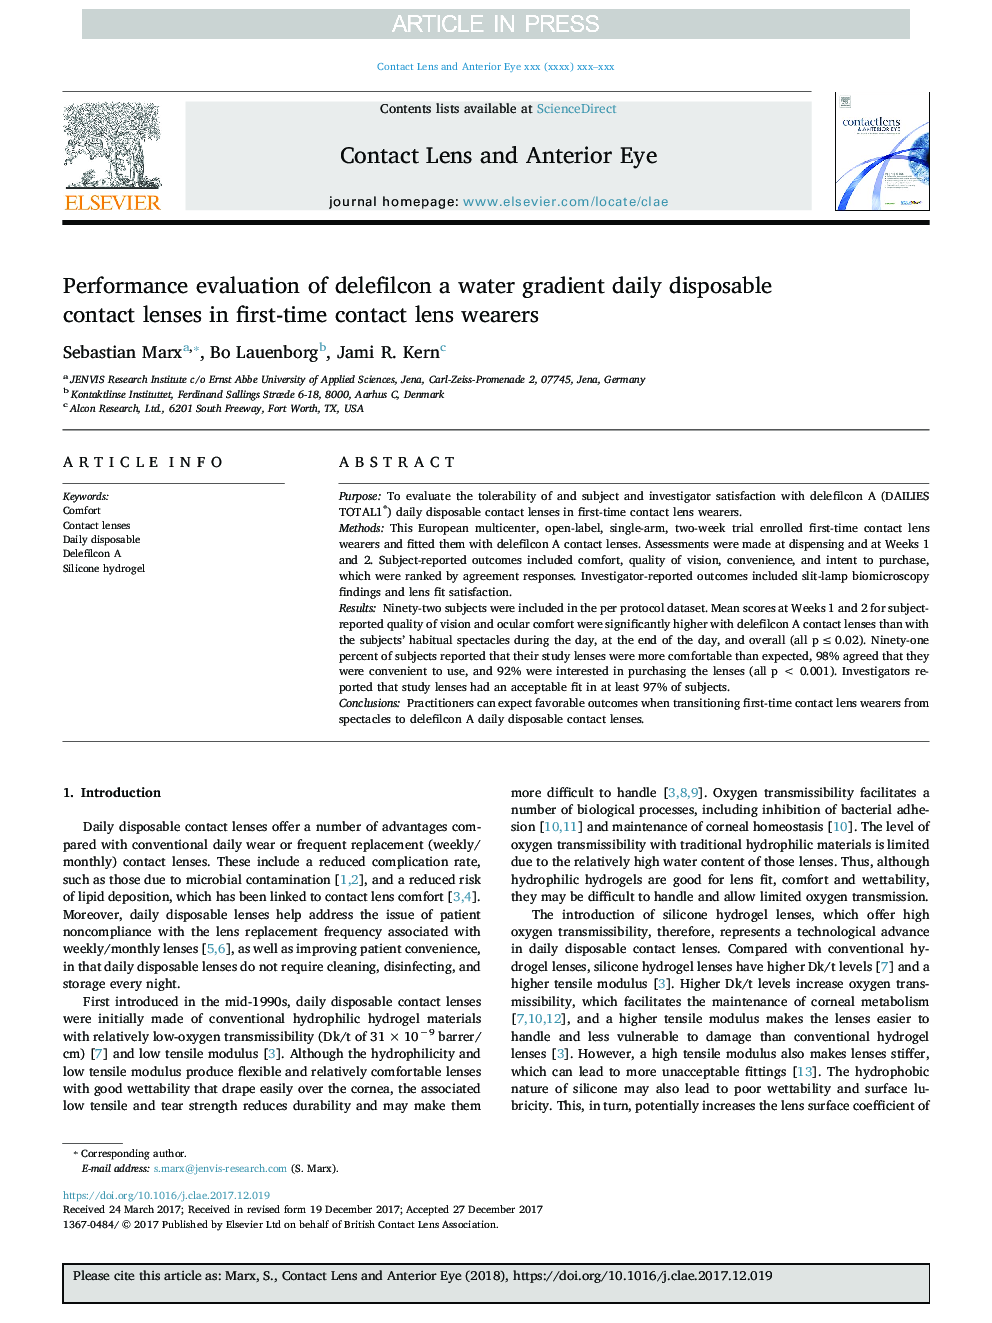 Performance evaluation of delefilcon a water gradient daily disposable contact lenses in first-time contact lens wearers